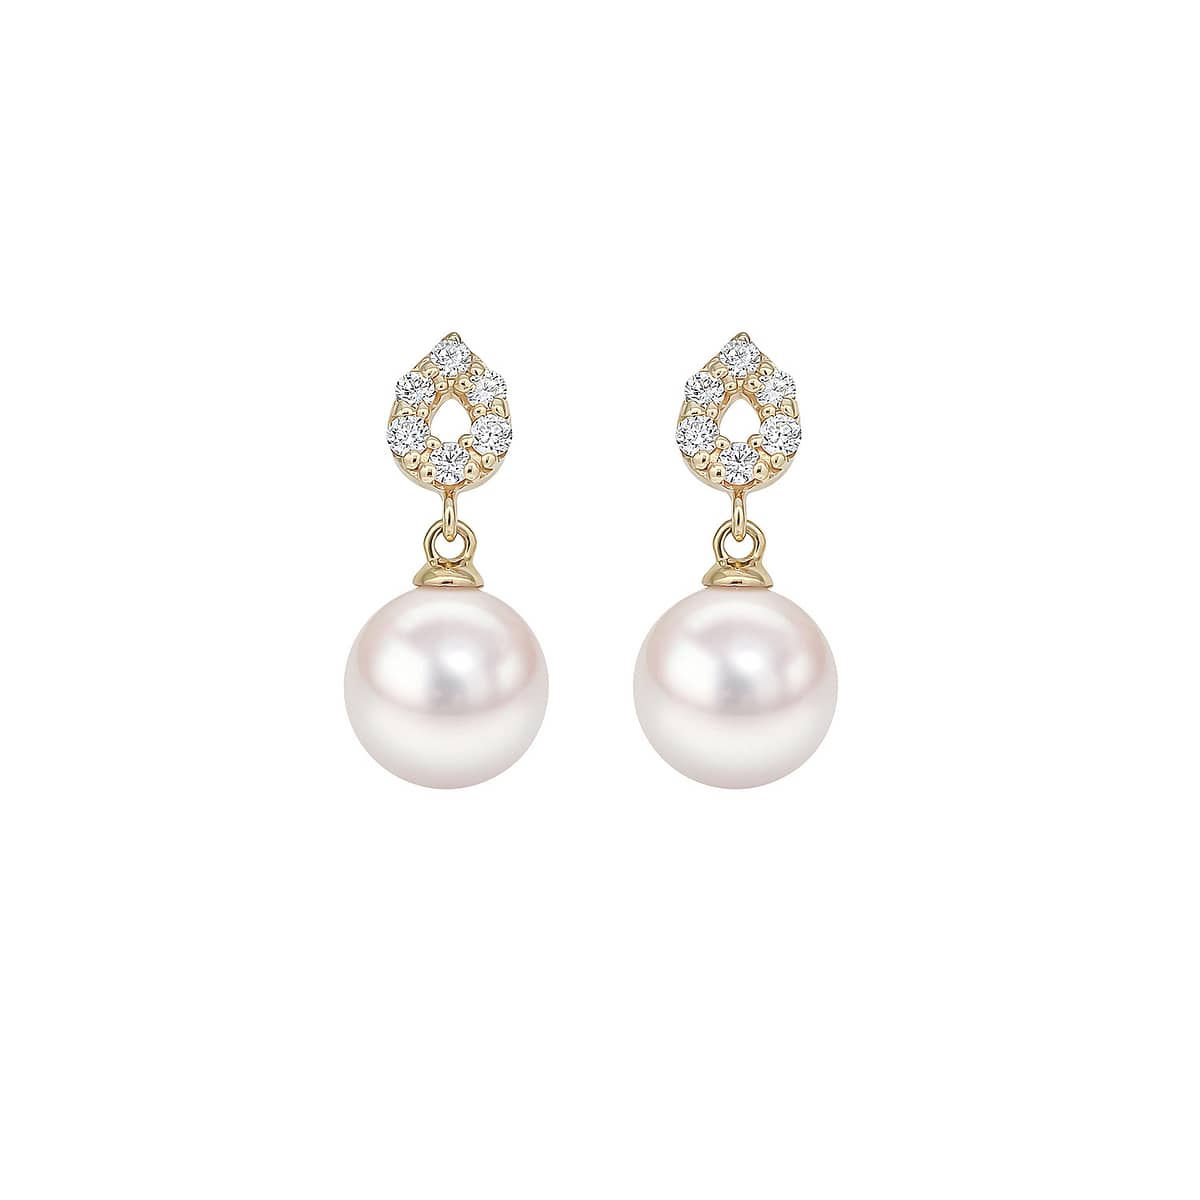 18ct yellow gold Akoya pearl and diamond earrings
Pearls size: 6.5x7mm
Diamonds: 0.14cts
Metal: 18ct Yellow Gold
Akoya Pearls, harvested off Japanese coasts, are considered the most iconic species of cultured pearls. Ranging in size from 4 – 10mm, they incorporate the finest pearls with diamonds of minimum G colour and VVS clarity, mounted in 18ct gold.
Model Ref. A0246-18YG